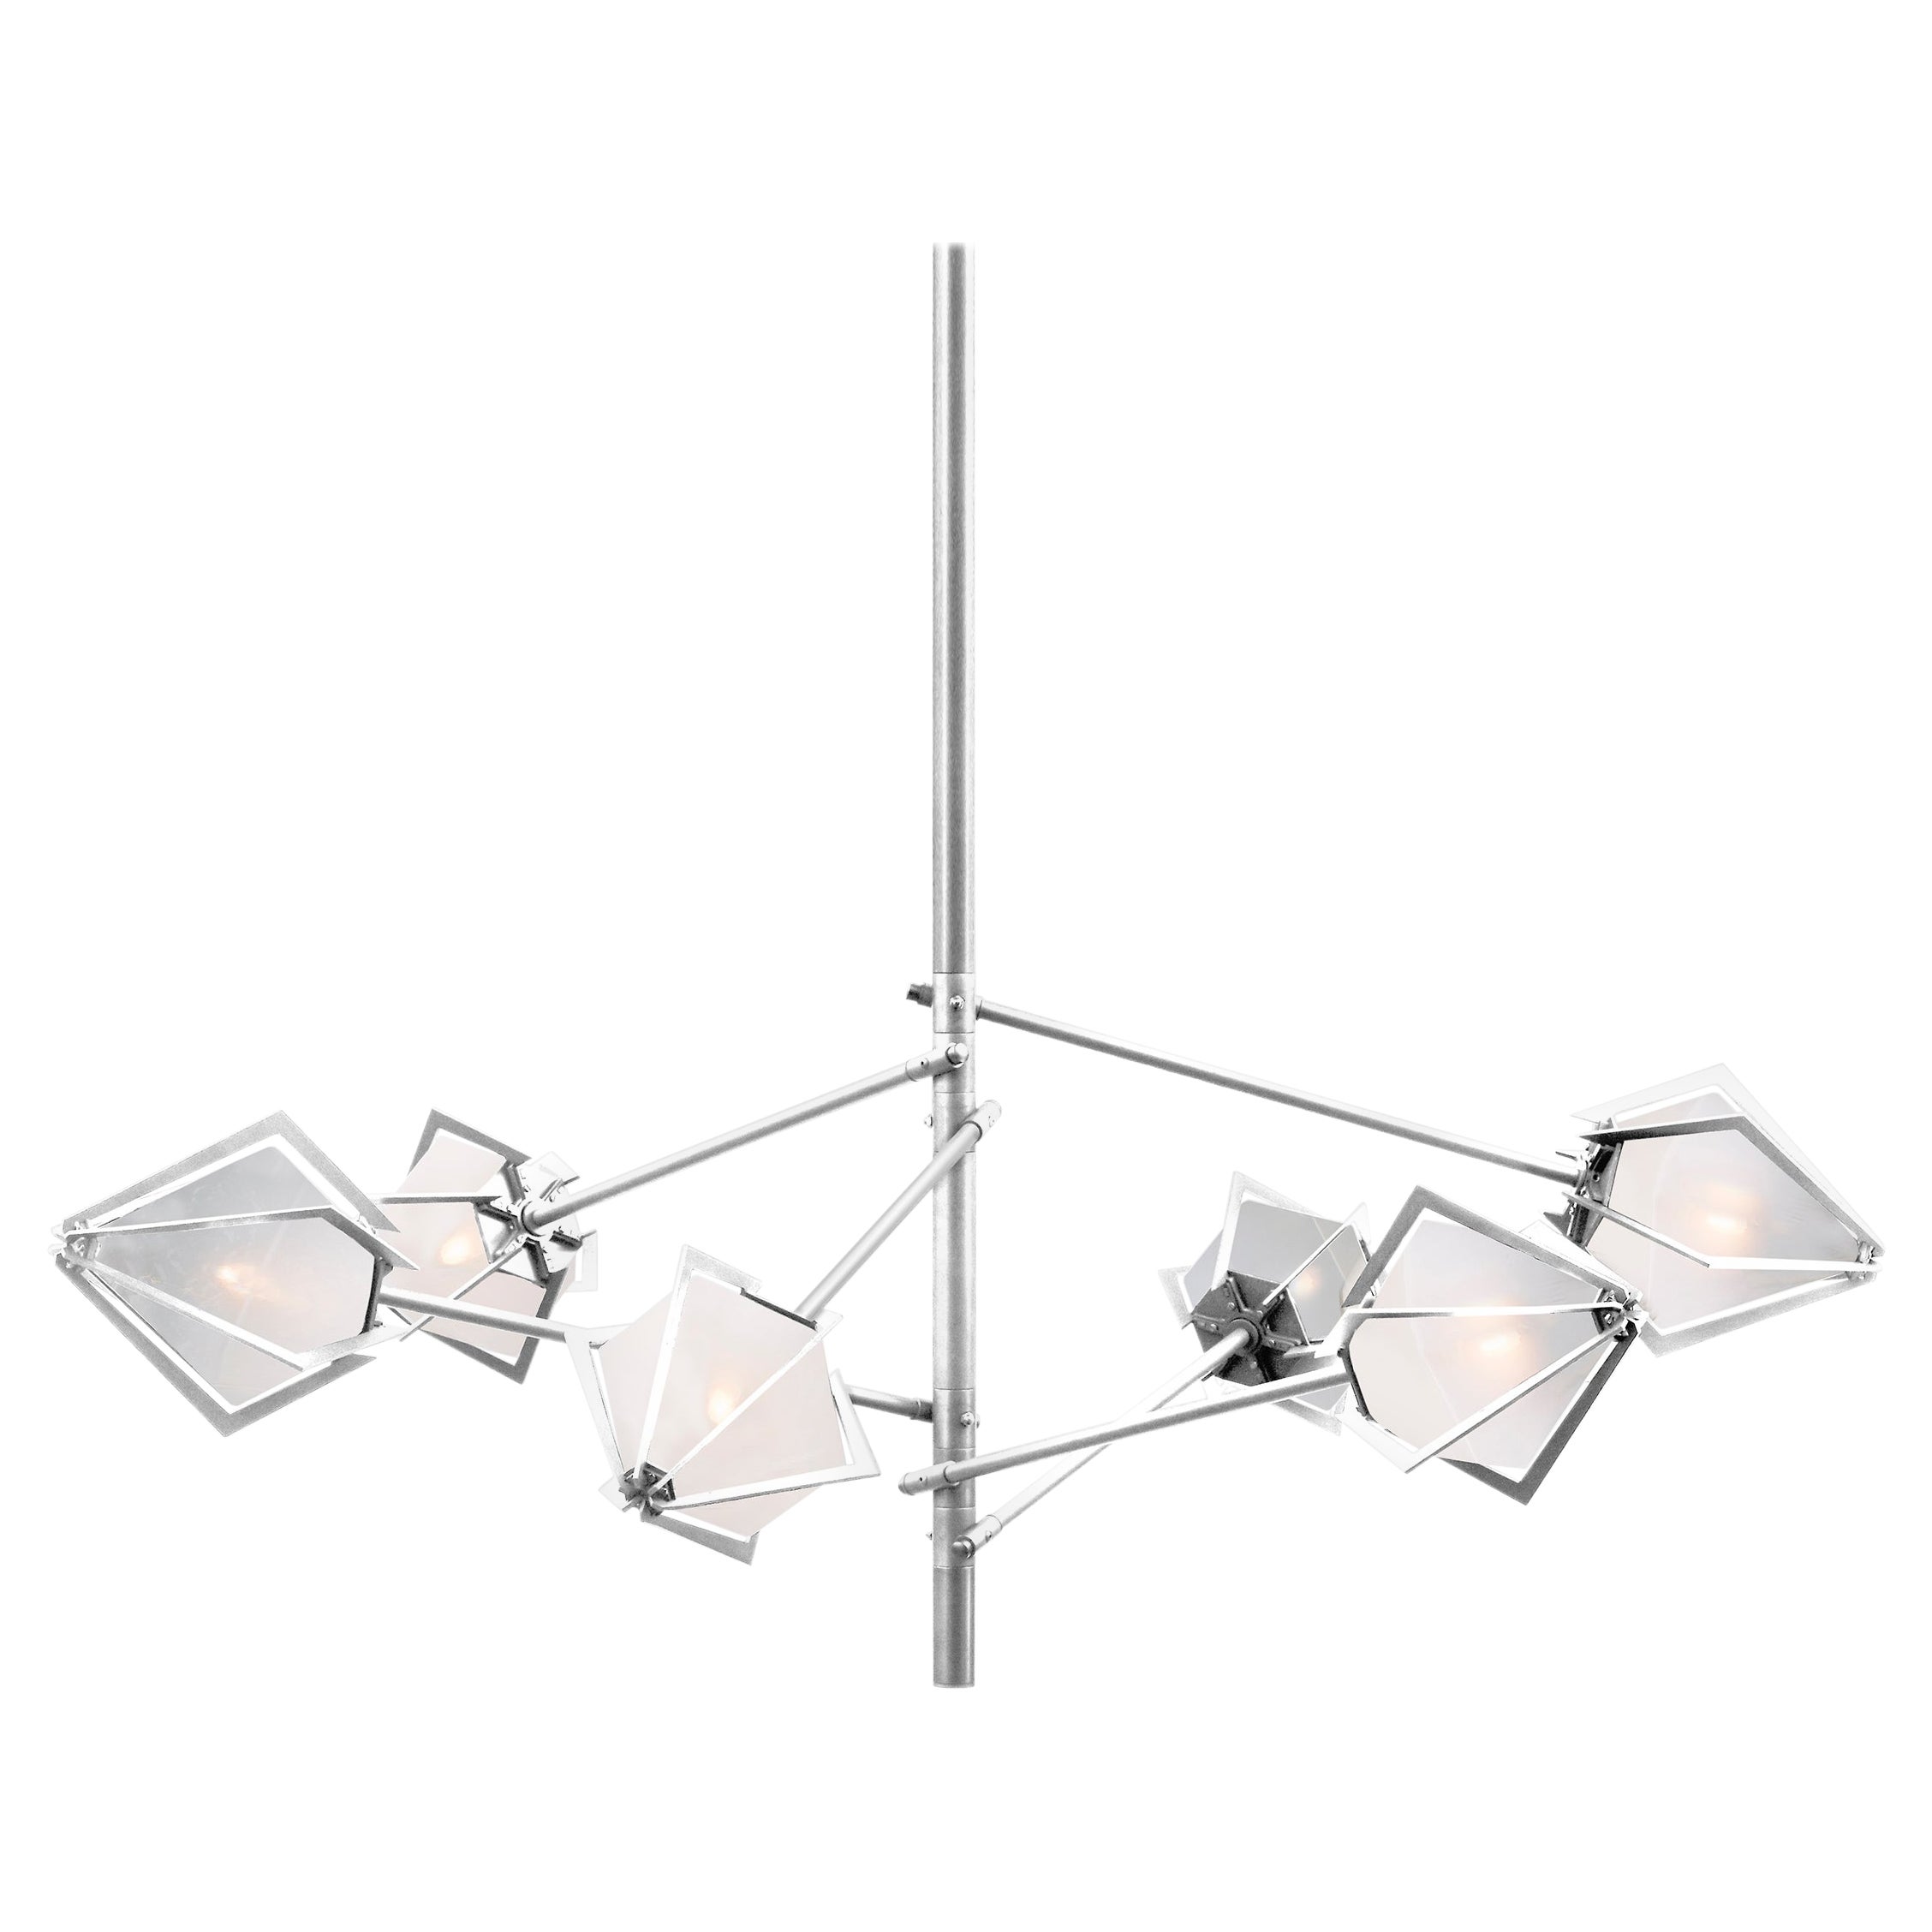 Harlow Spoke Chandelier Small in Satin Nickel and Alabaster White Glass